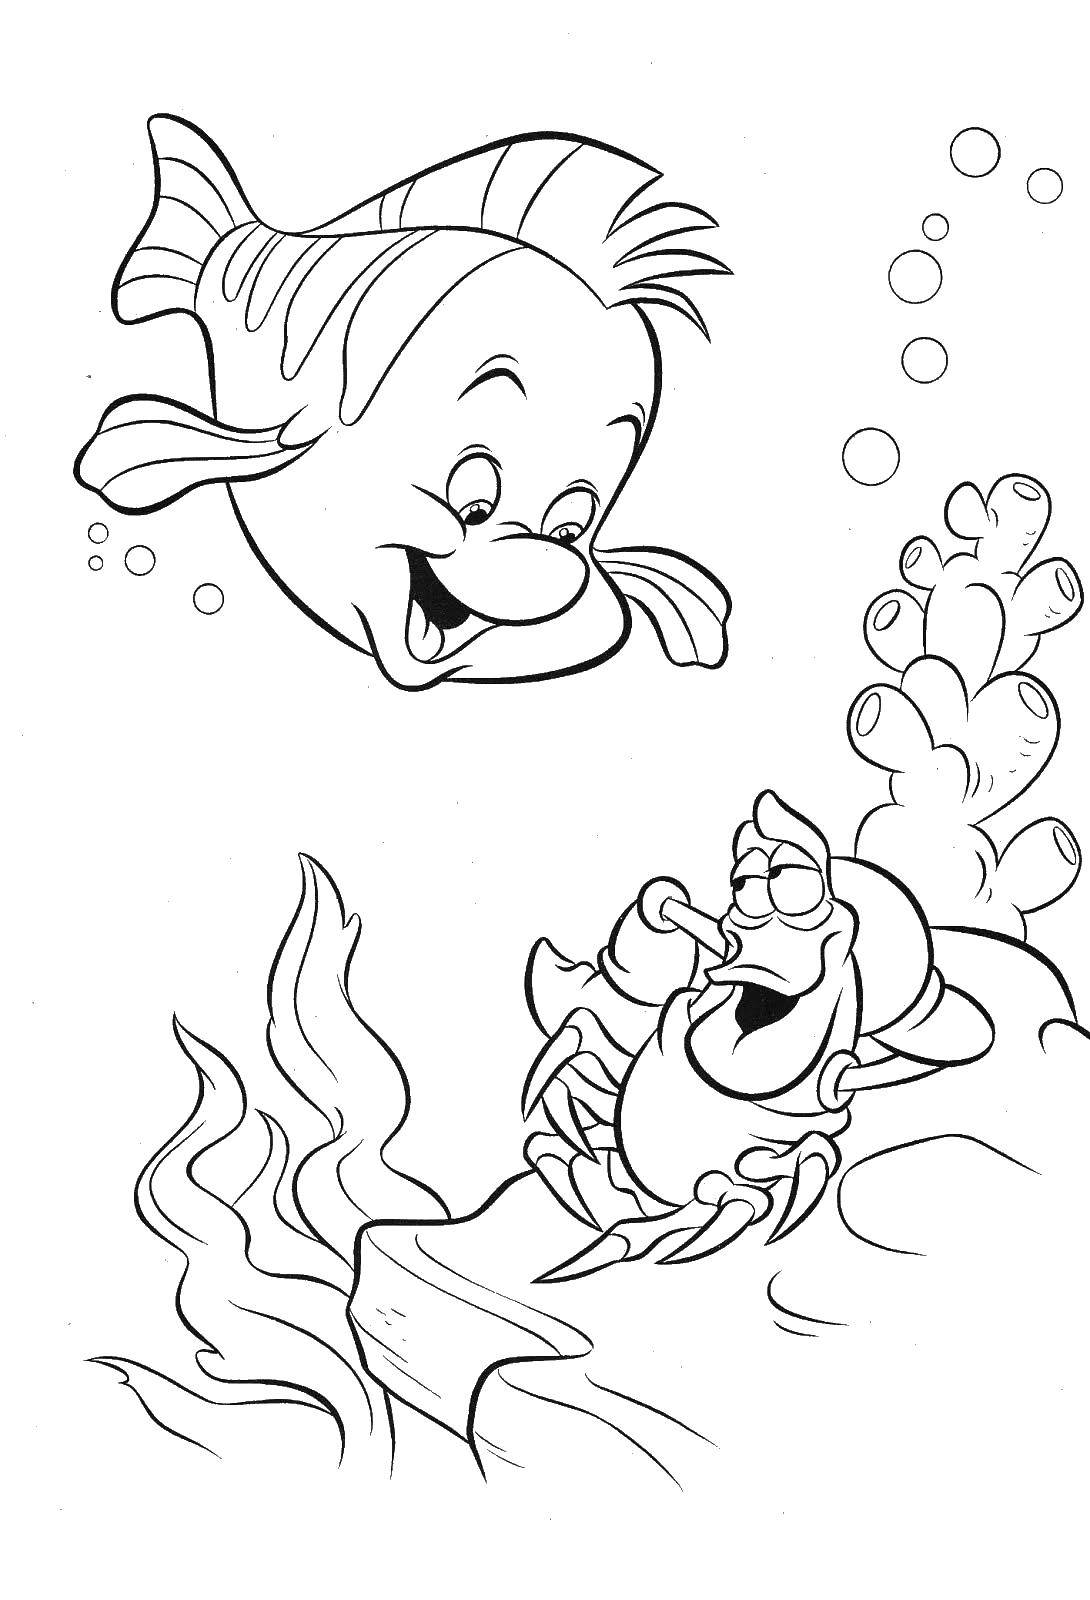 Coloring Flounder and lobster. Category The little mermaid. Tags:  Disney, the little mermaid, Ariel.